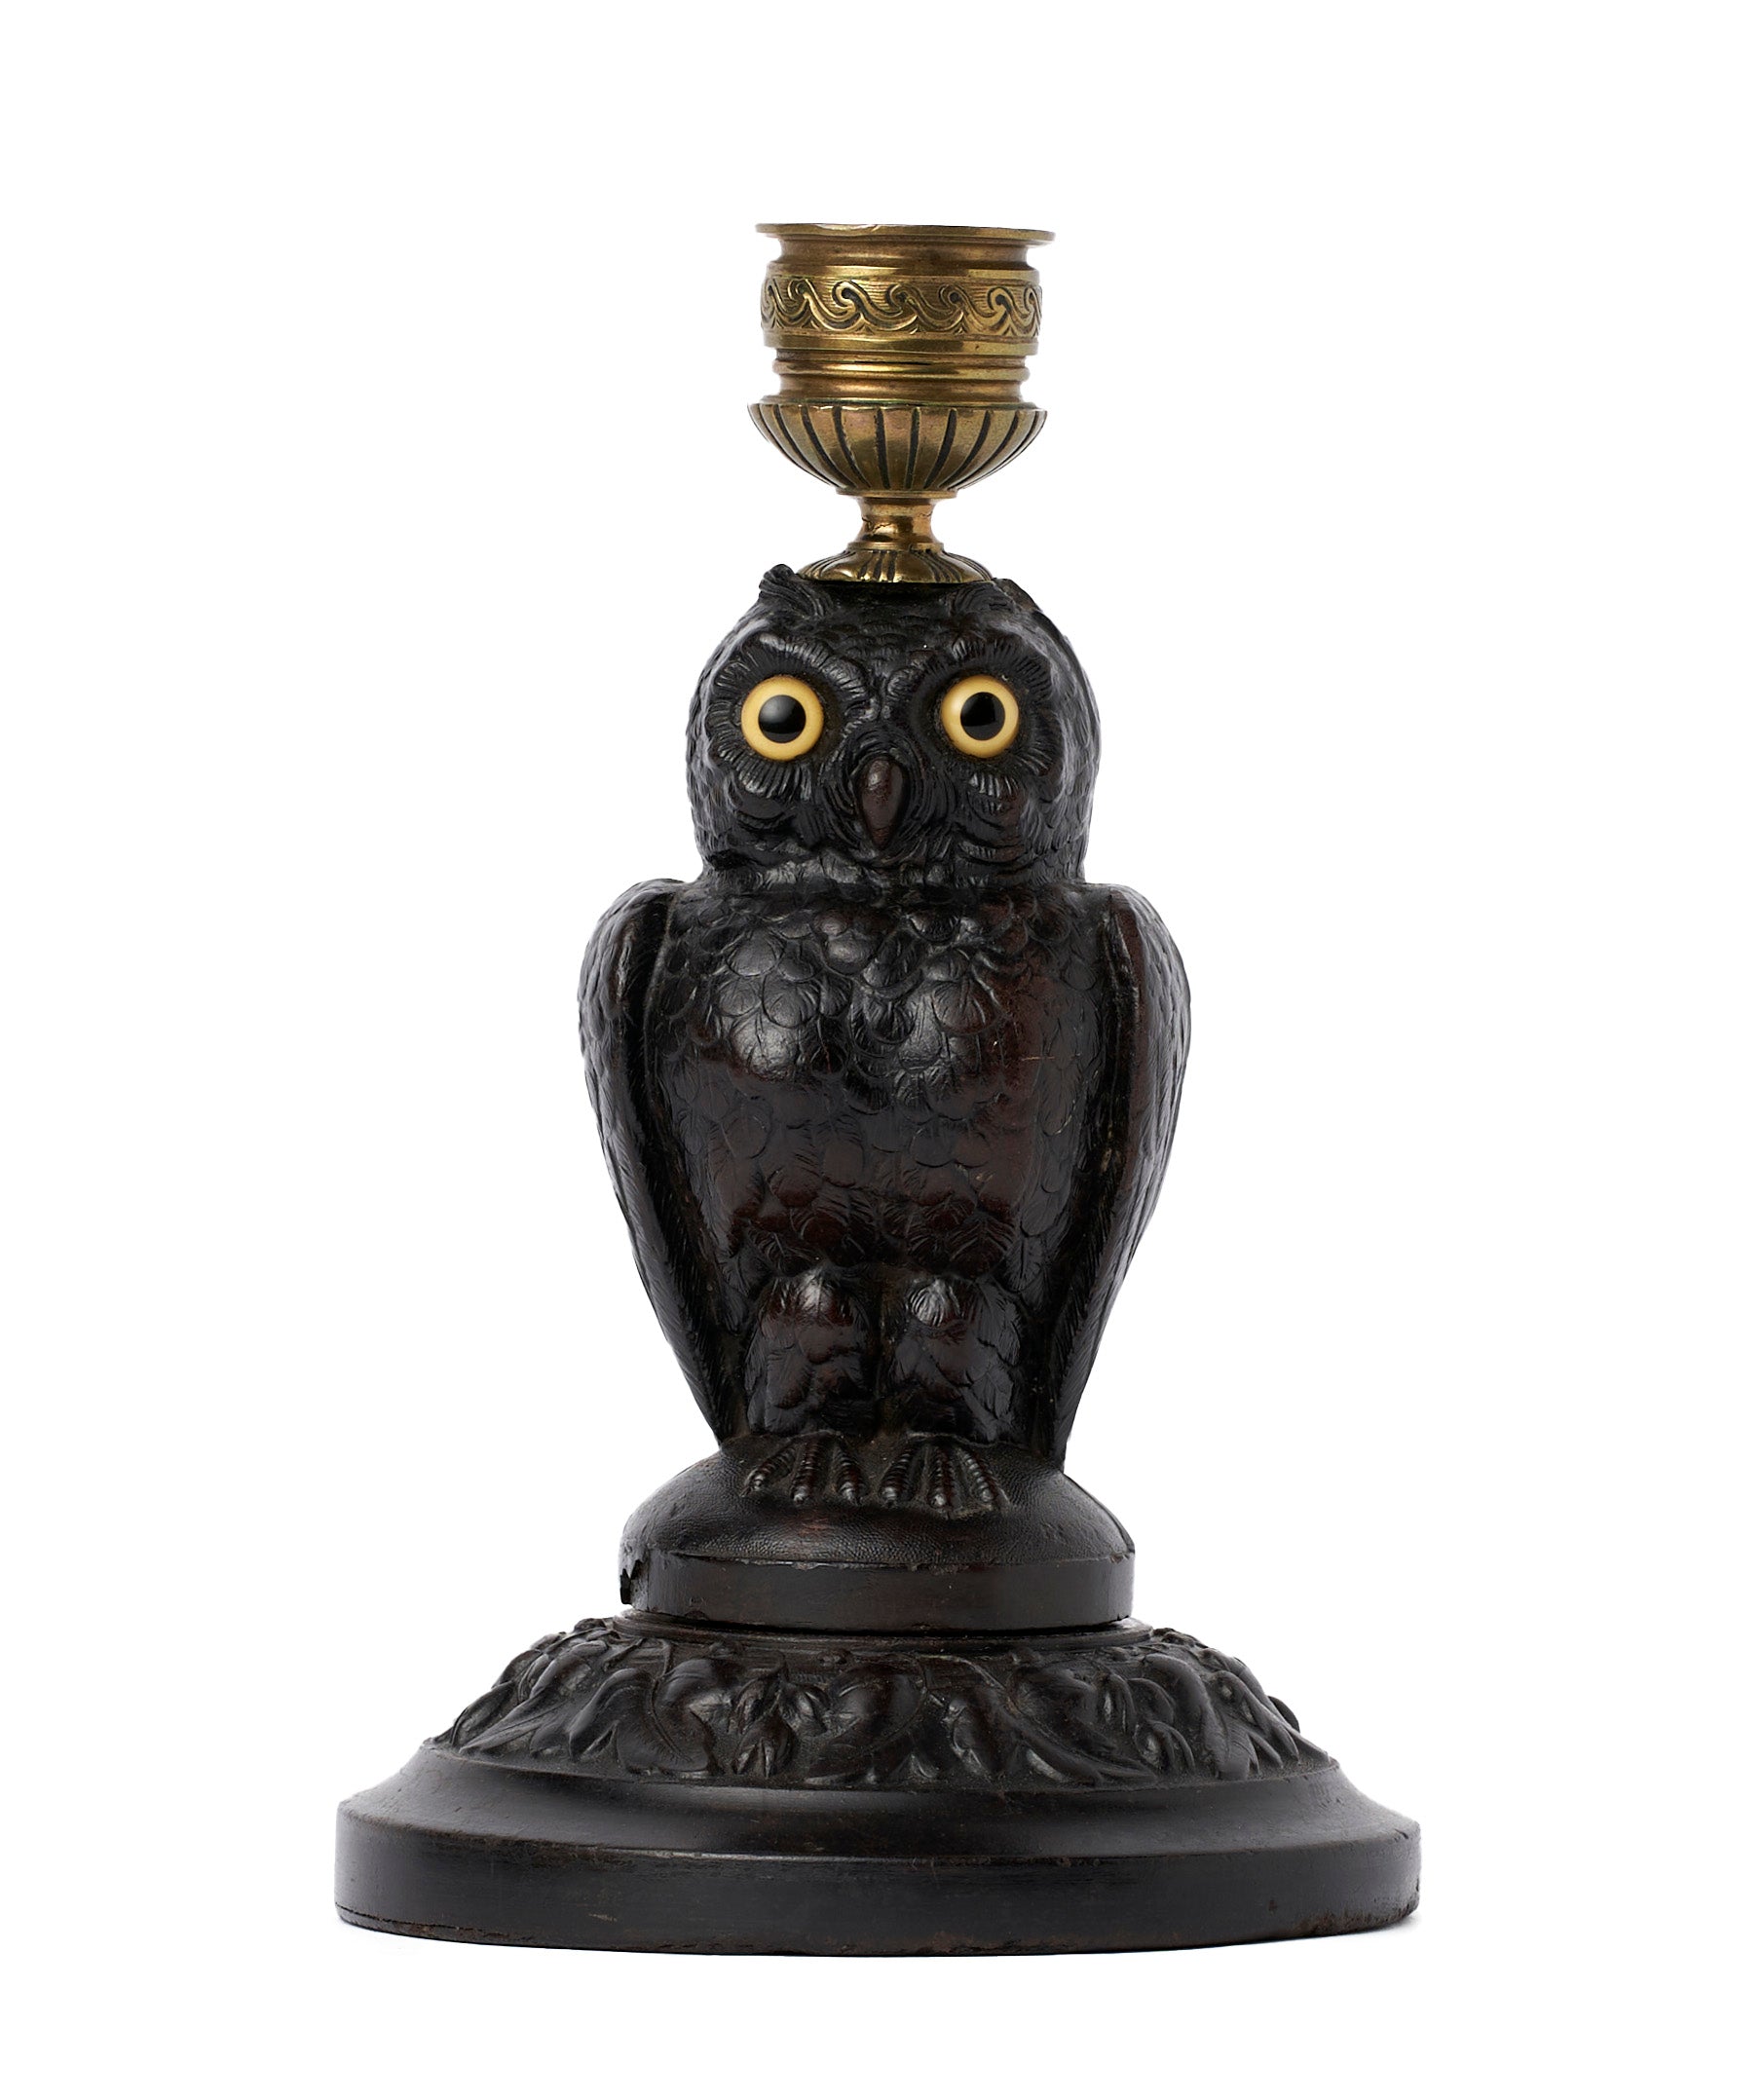 SOLD A very appealing pressed resin and brass owl-form candlestick, Black Forest Region circa 1880